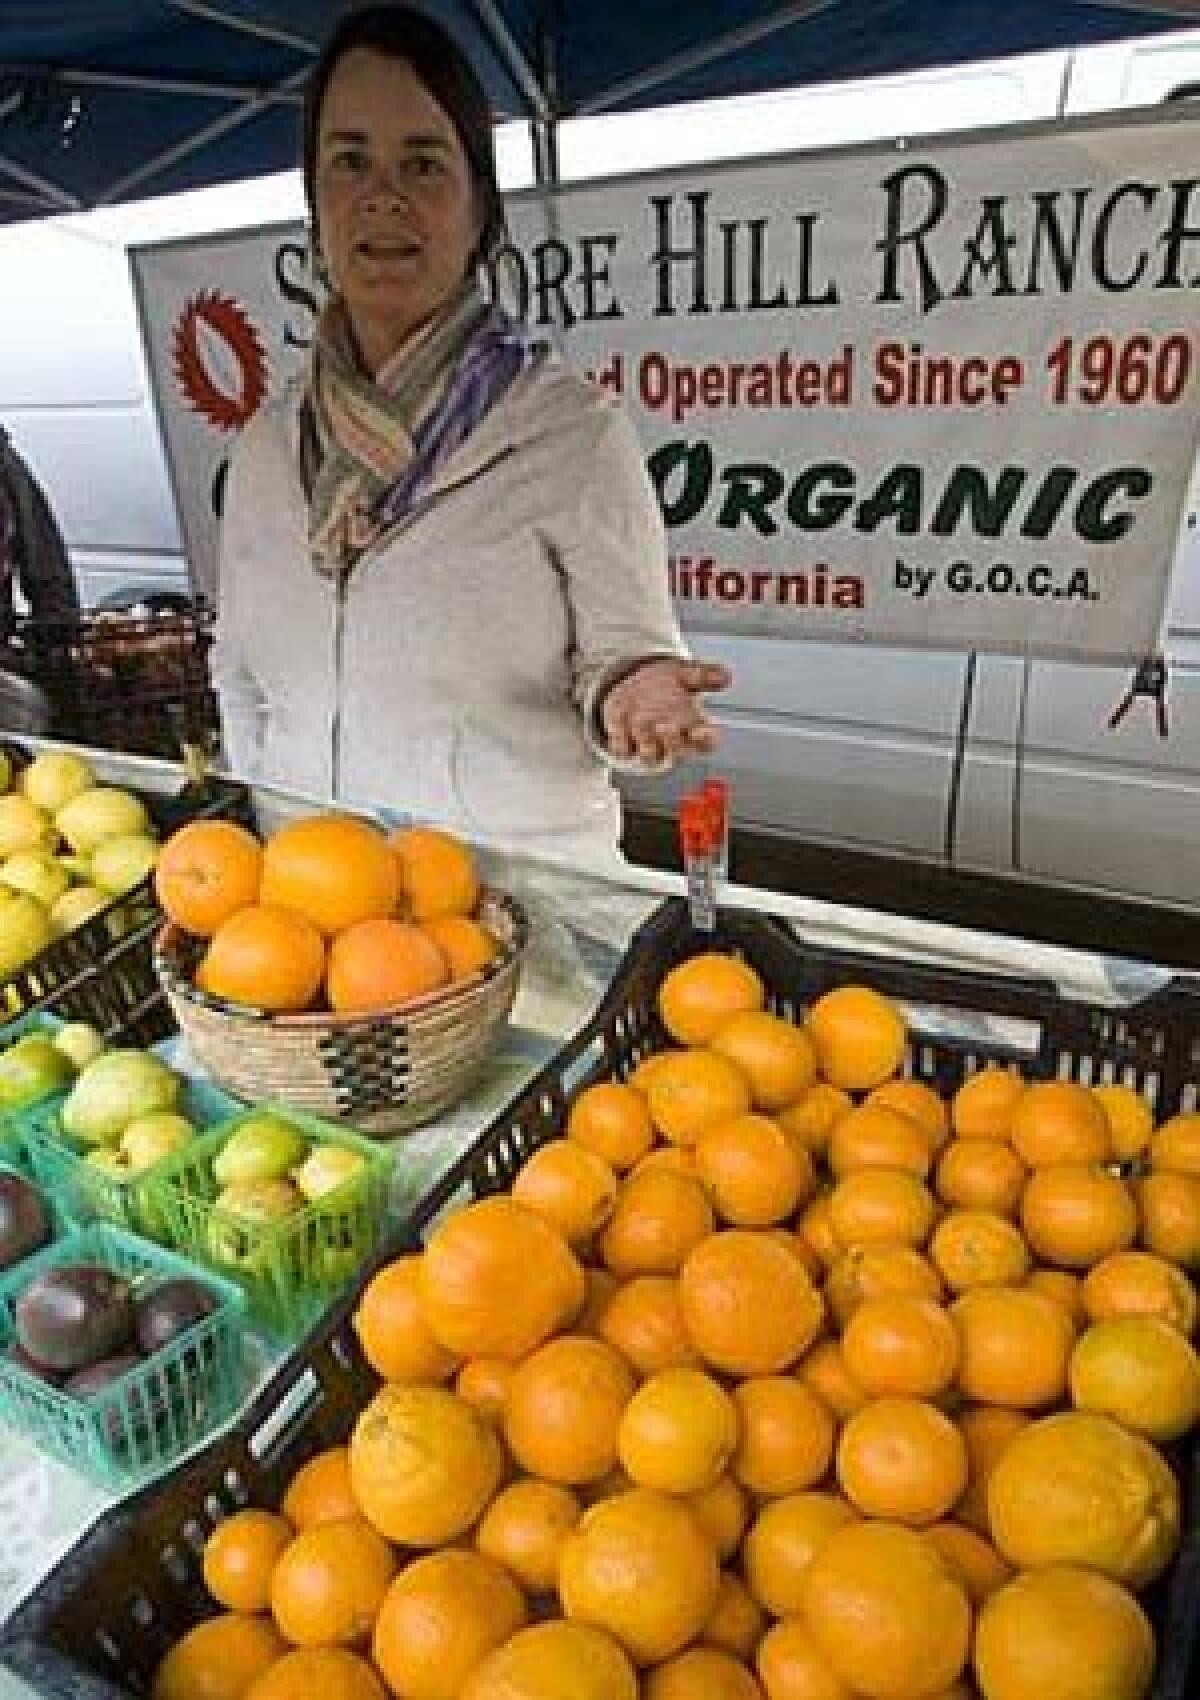 Jeanne Stehly of Sycamore Hill Ranch, from Fillmore, points to her Pixie mandarins, at the Santa Monica Organic farmers market. She just started bringing this variety; the fruits are very good, and naturally low in acidity.